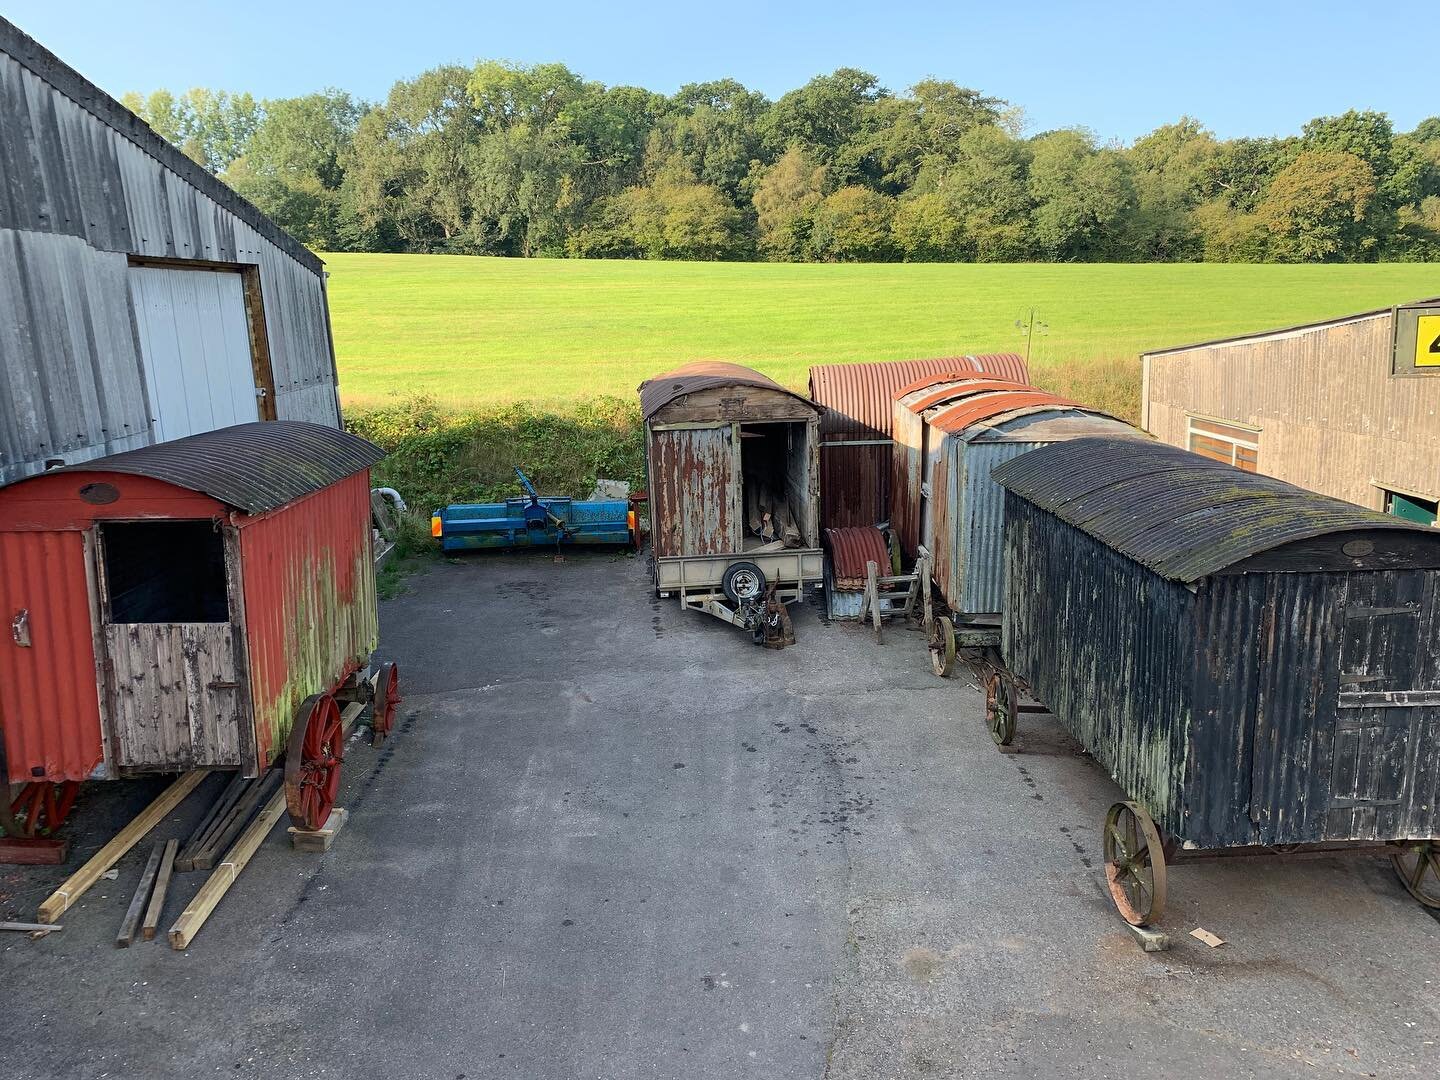 Six huts at the workshop  and more to be fixed and rehomed 🤪  Been having a hut shuffle today as we&rsquo;re getting a little full 😬
Thanks #maxpearce91 for braving &ldquo;being stupid enough&rdquo; this forklift photo 😂. #shepherdshuts #garden #s